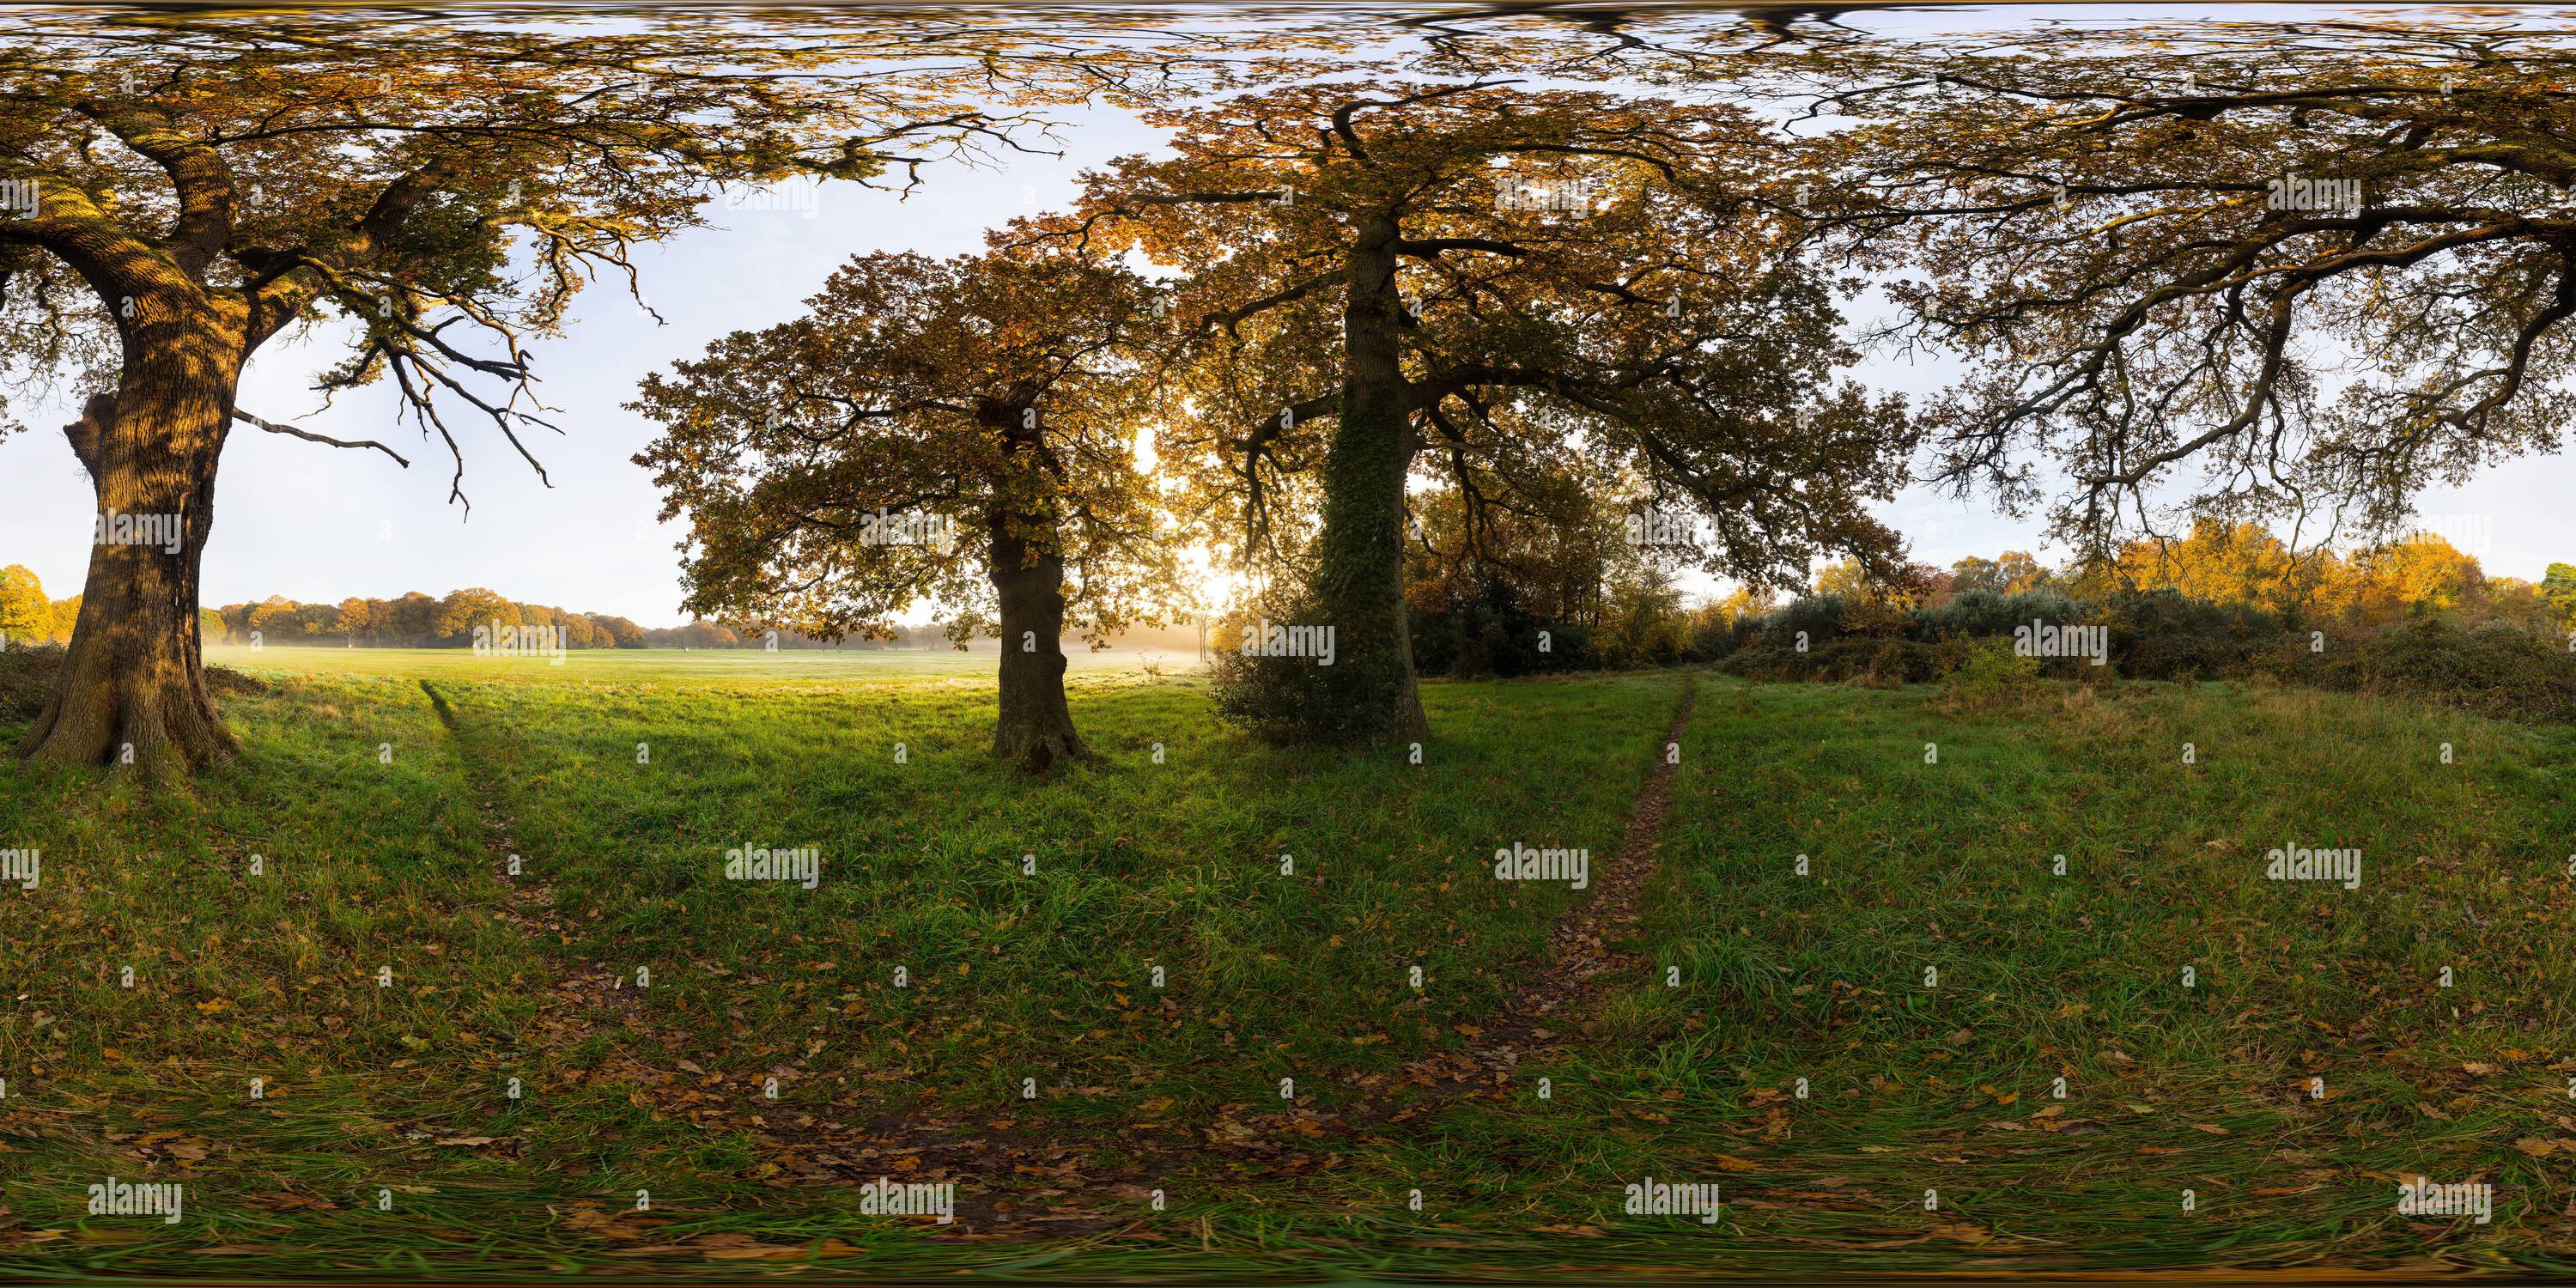 360 degree panoramic view of Oak trees on Southampton Common on a slightly misty morning in autumn, Southampton, Hampshire, England